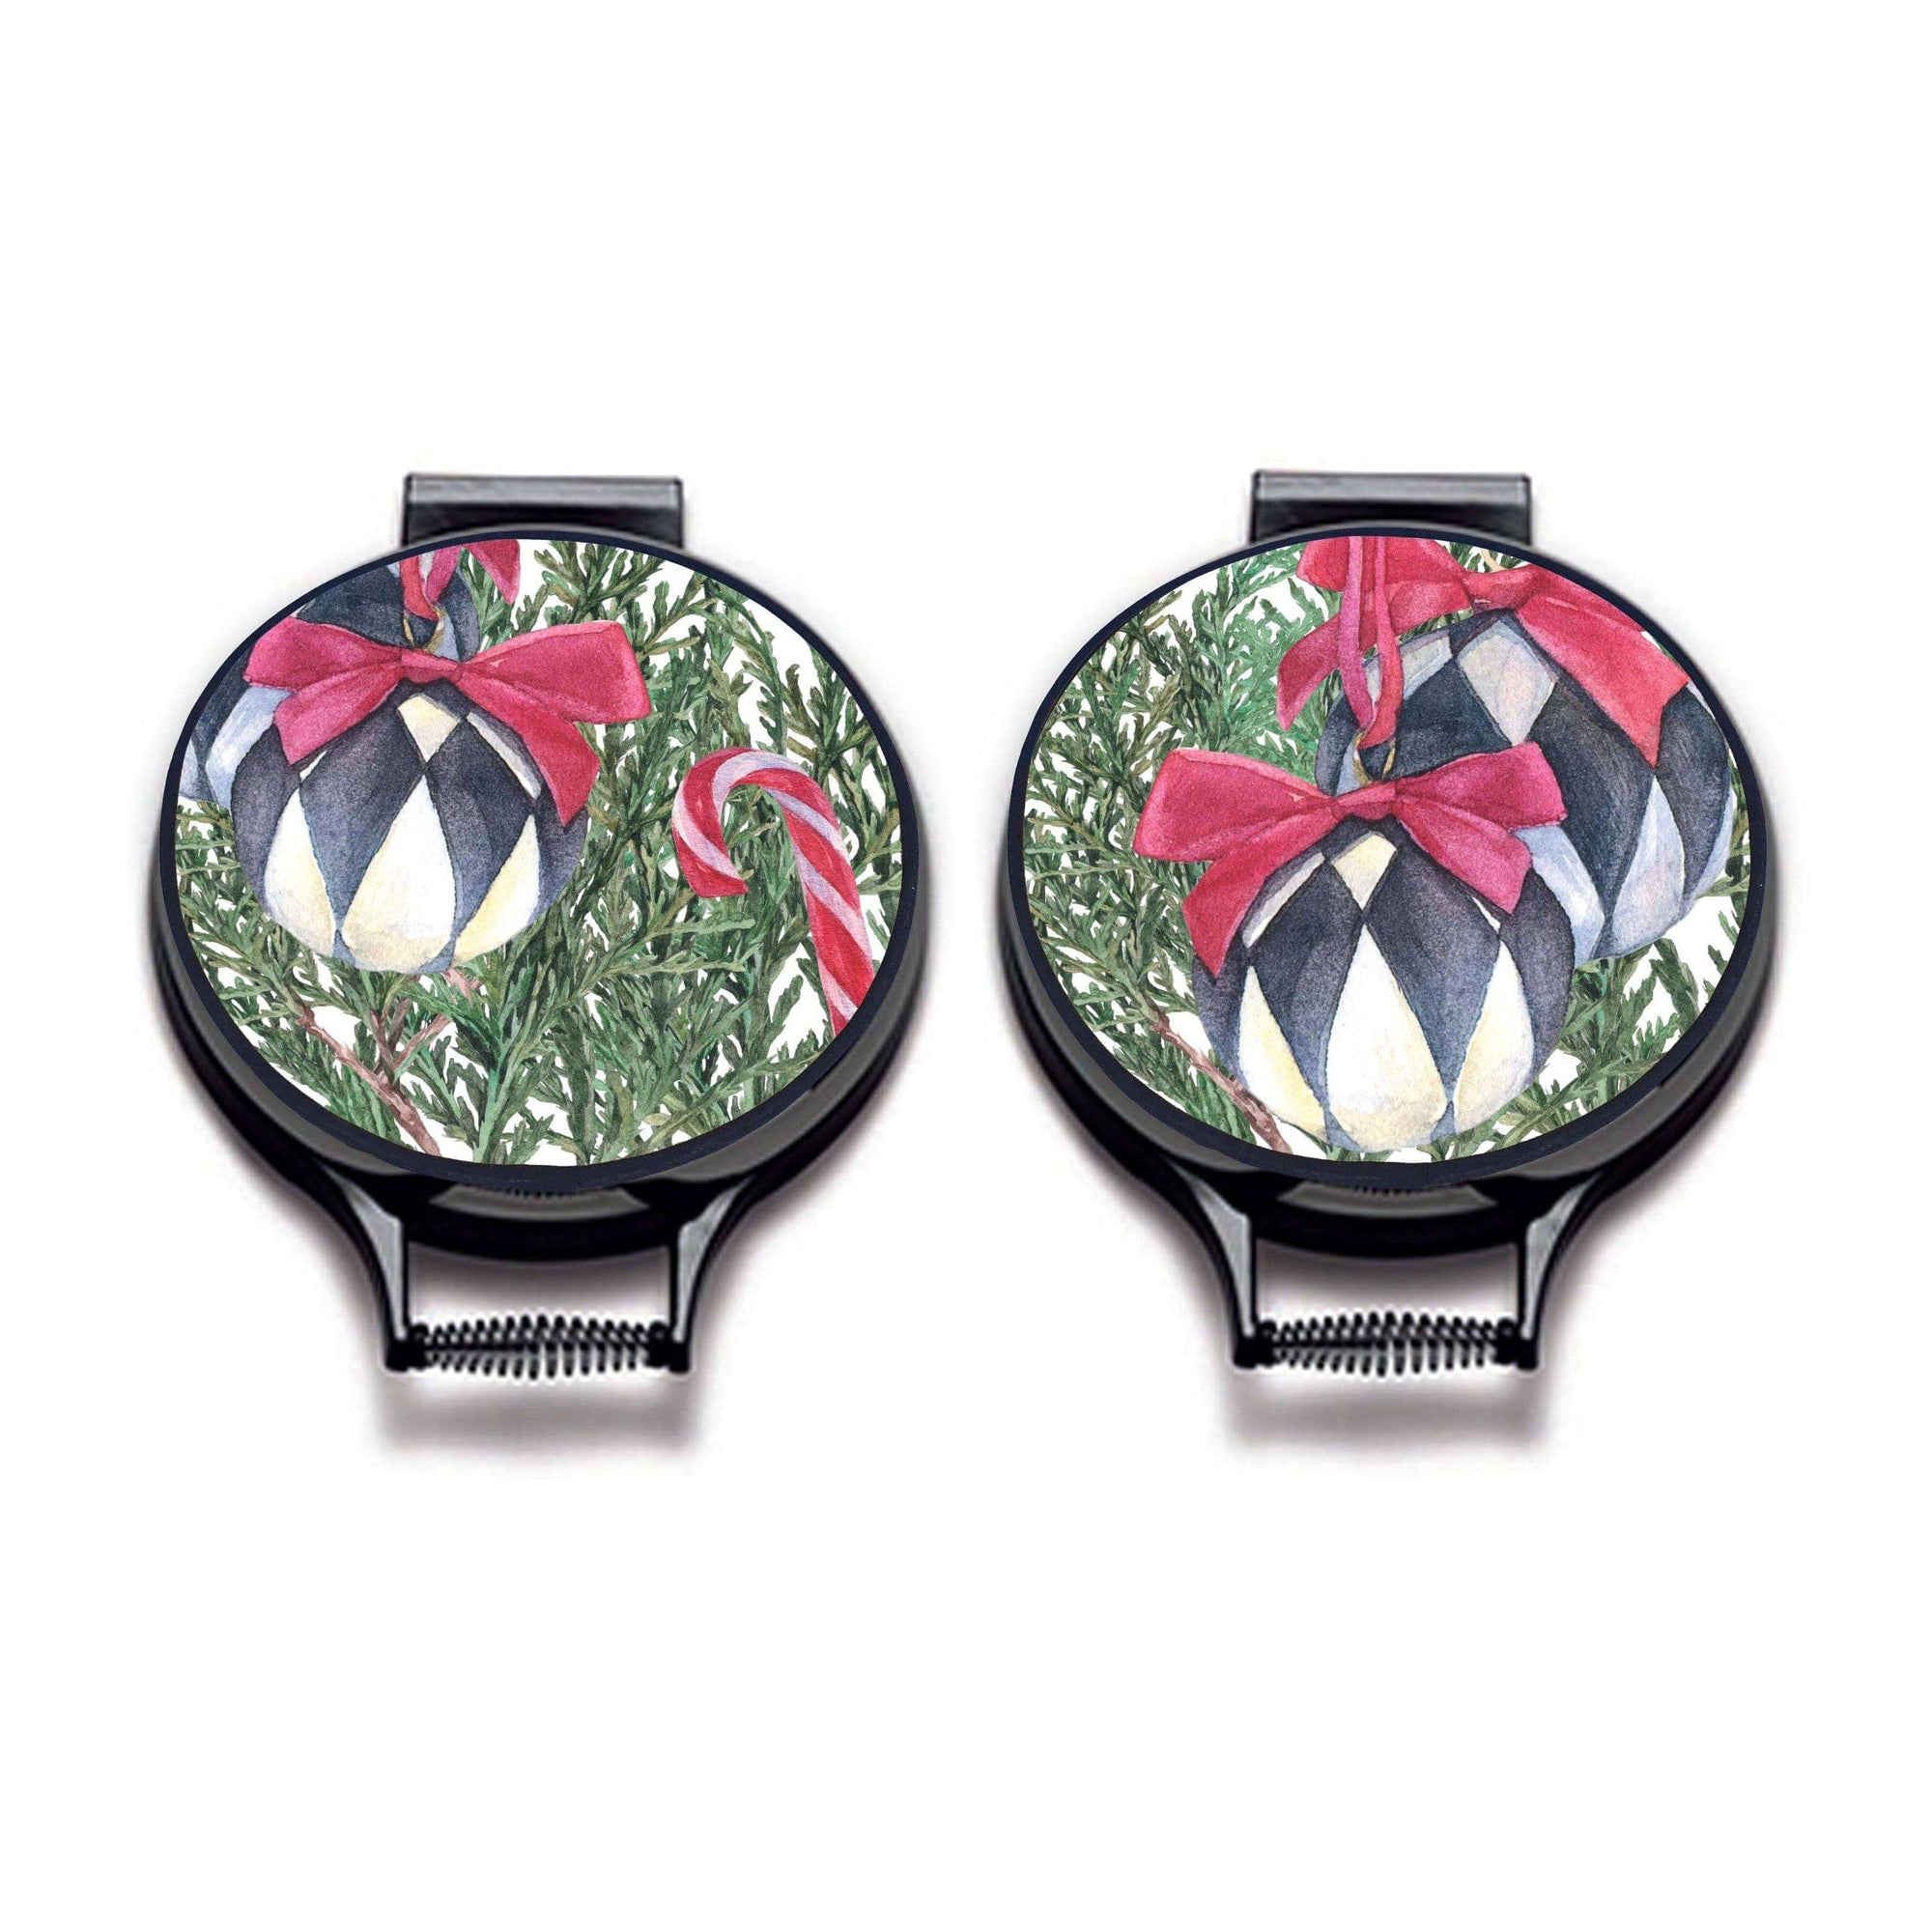 Set of two. Illustration of Christmas tree bows with lack and white baubles with red bows, candy canes, oranges and xmas decorations on linen circular hob cover with black hemming. Pictured on metal cooker lid on an isolated background. Mustard and Gray